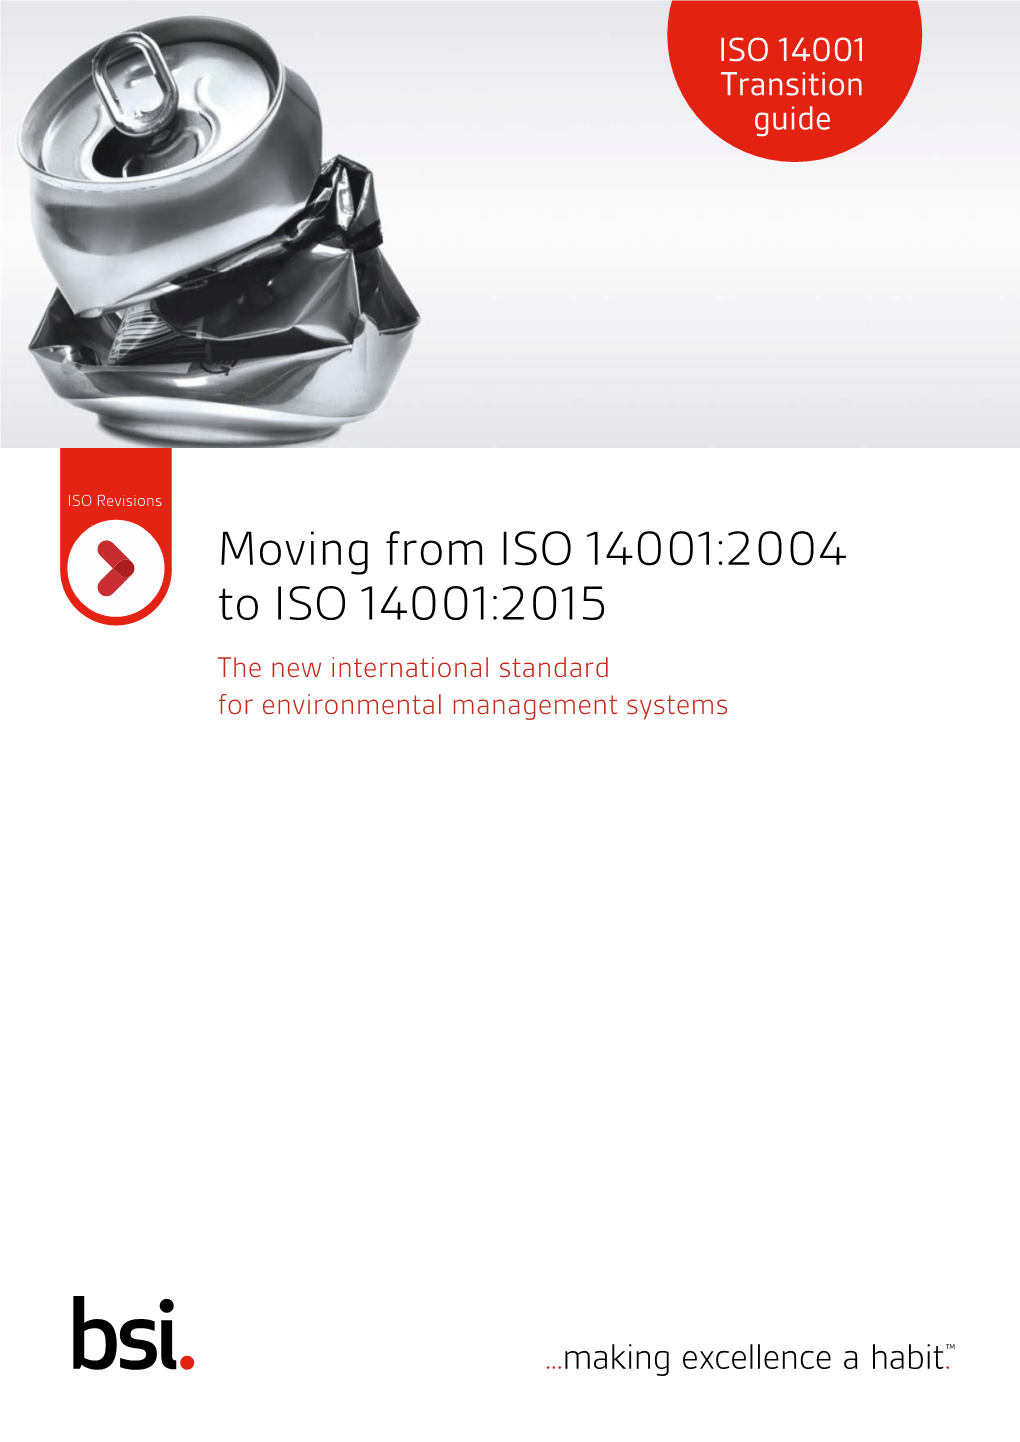 Moving from ISO 14001:2004 to ISO 14001:2015